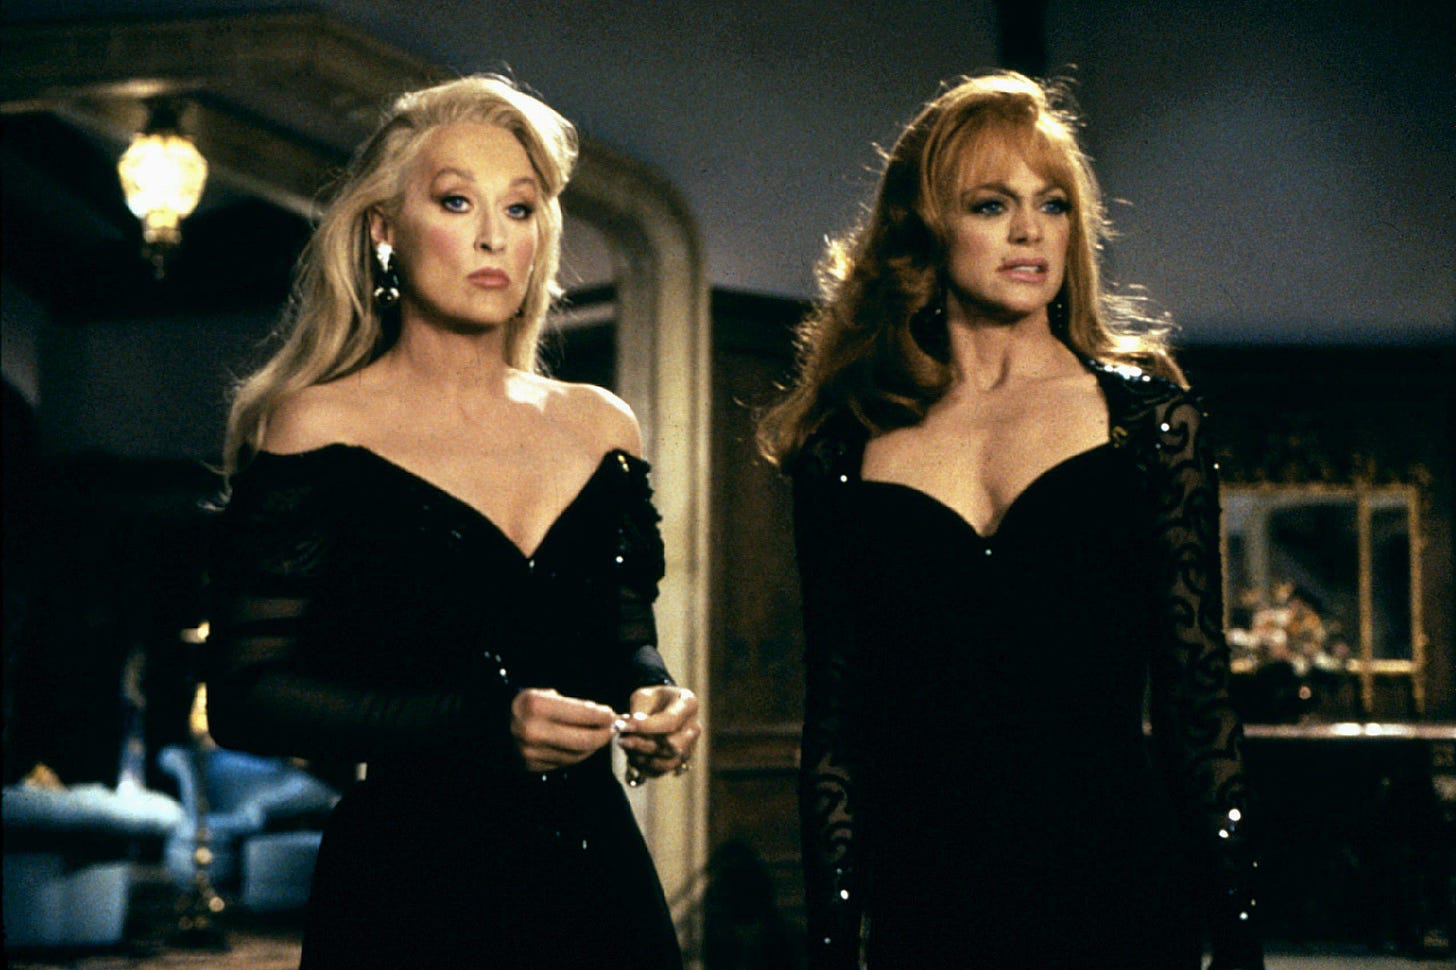 Meryl Streep and Goldie Hawn standing next to each other, both wearing black dresses